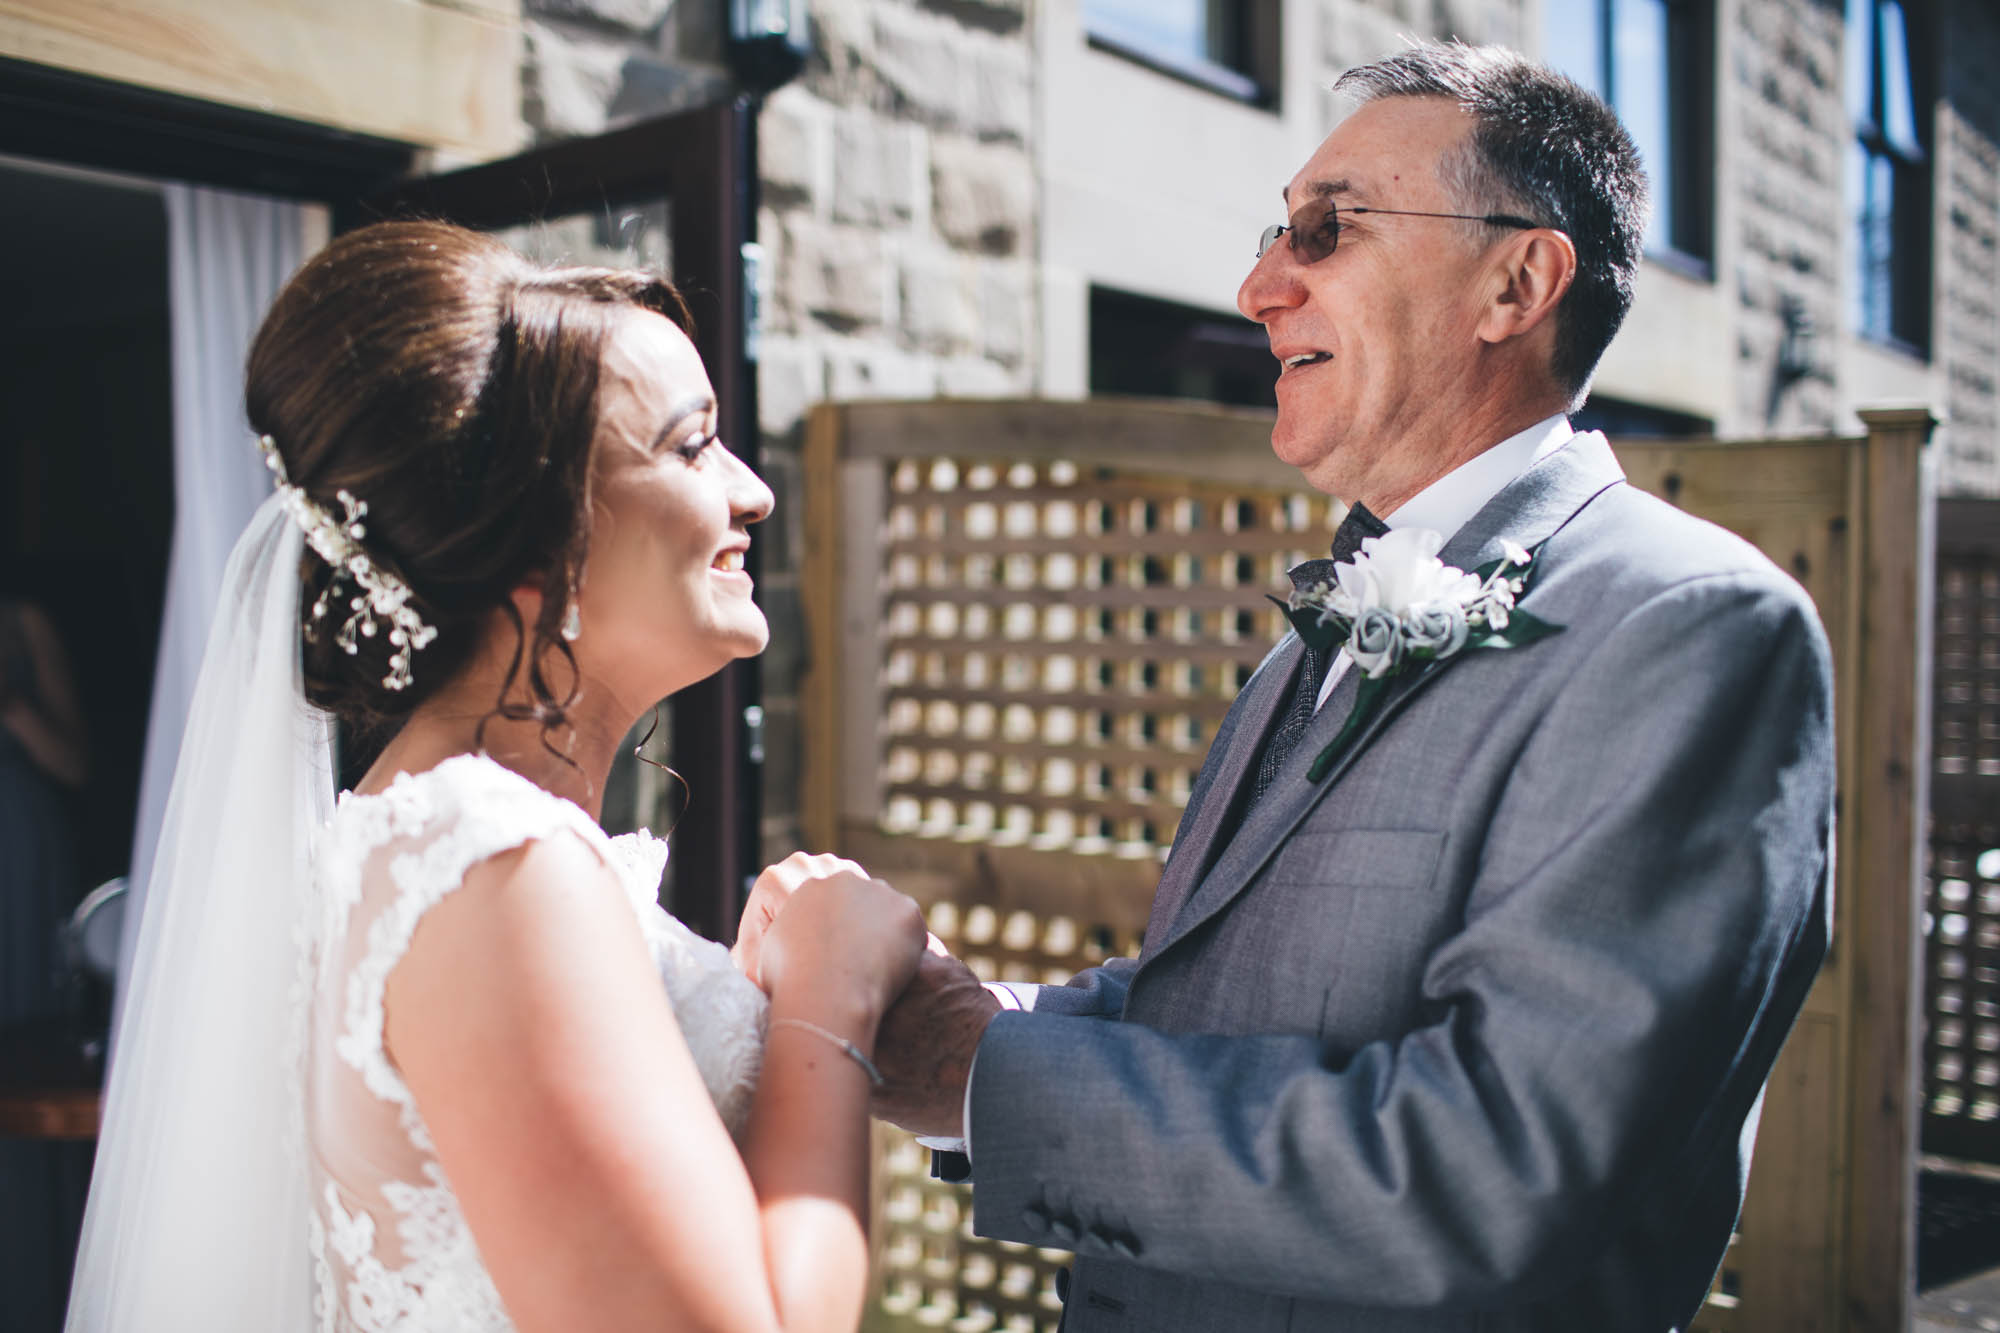 Father of Bride and daughter share a moment just after he sees her in Wedding dress for the first time